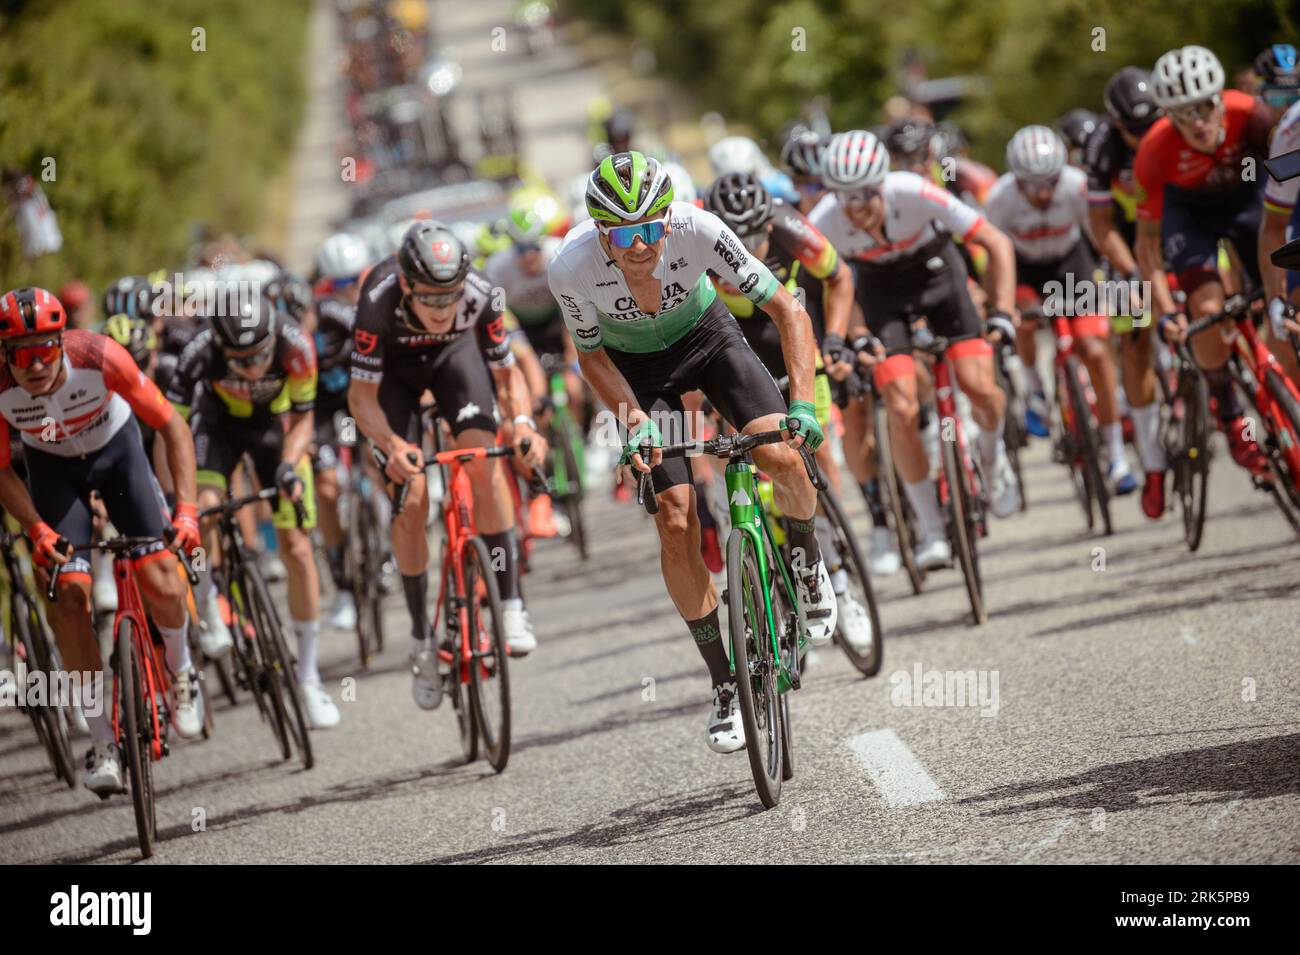 2023 Czech and Slovak National Chapionship, cycling, road race, Caja Rural, Michal Schlegel attacking pelotone, on June 25, 2023, Tlmace, Slovakia. (C Stock Photo